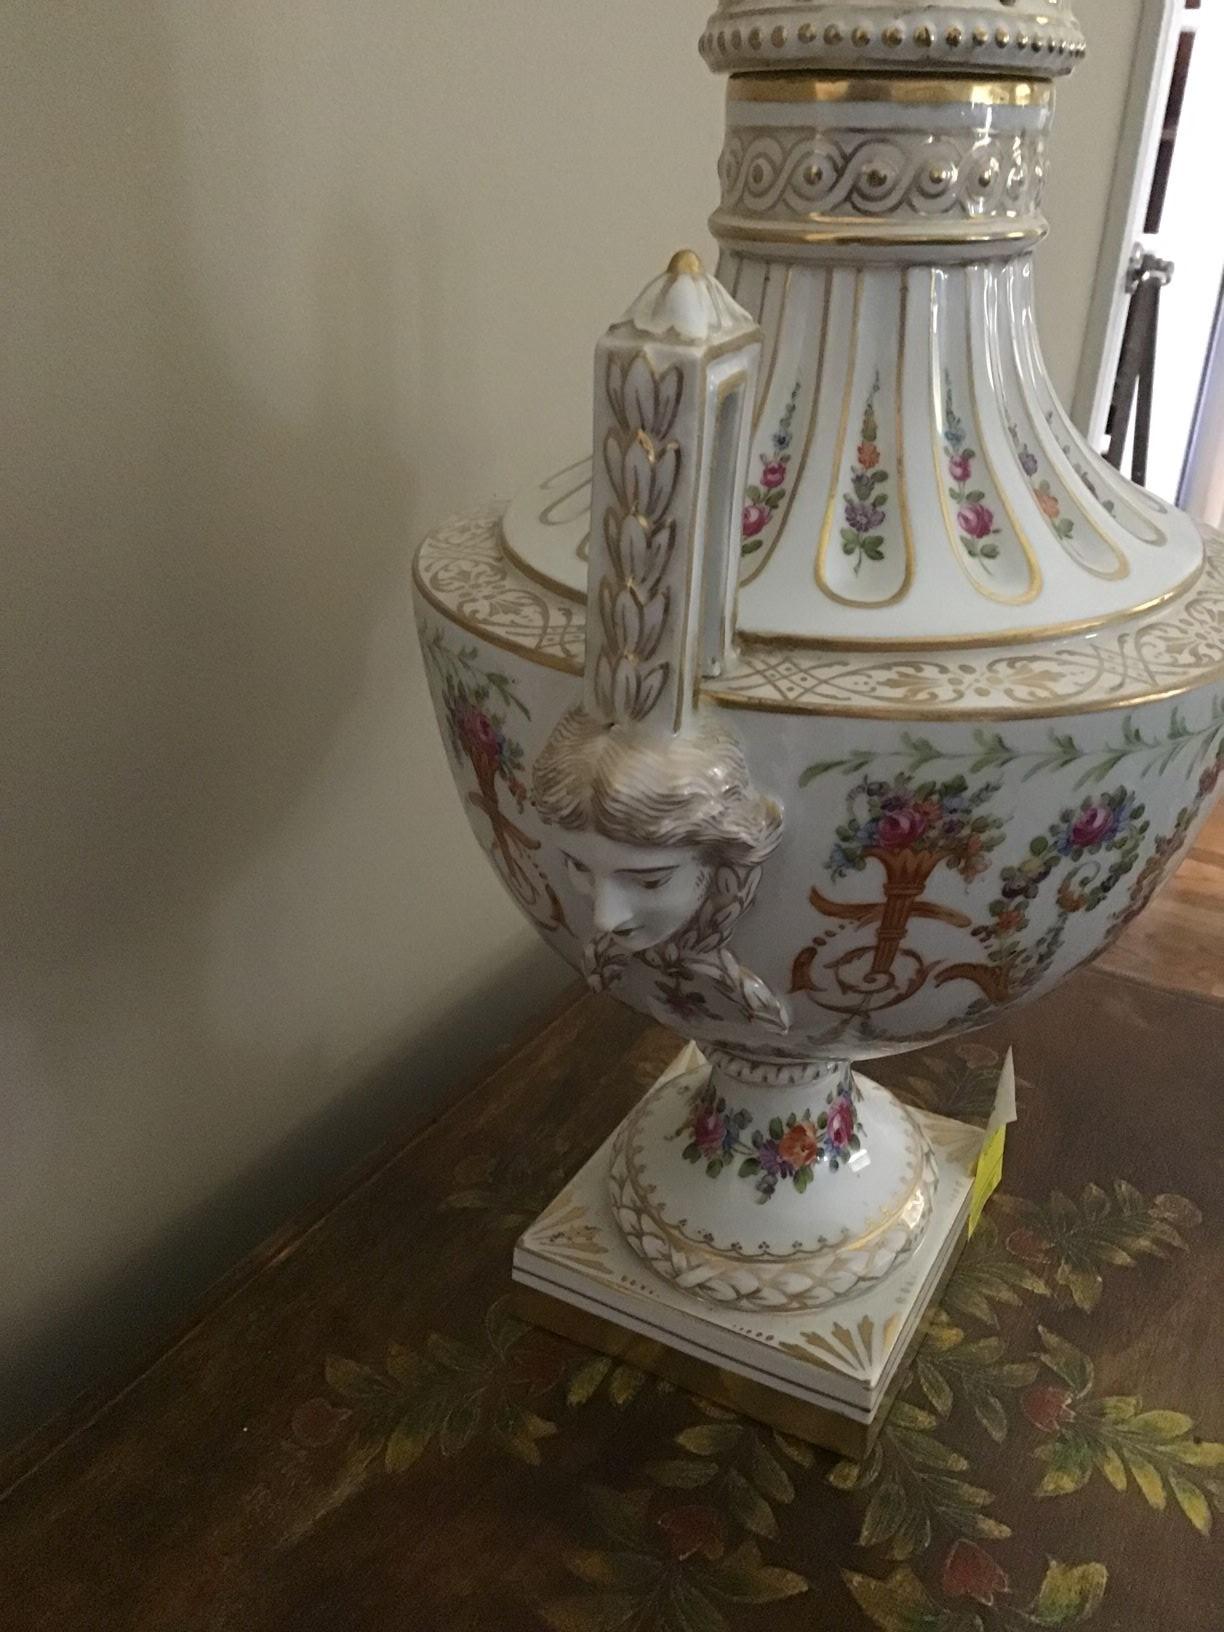 LARGE CARL TIEHLE COVERED URN. DRESDEN CIRCA 1851-1891. ORIGINAL COST $1450